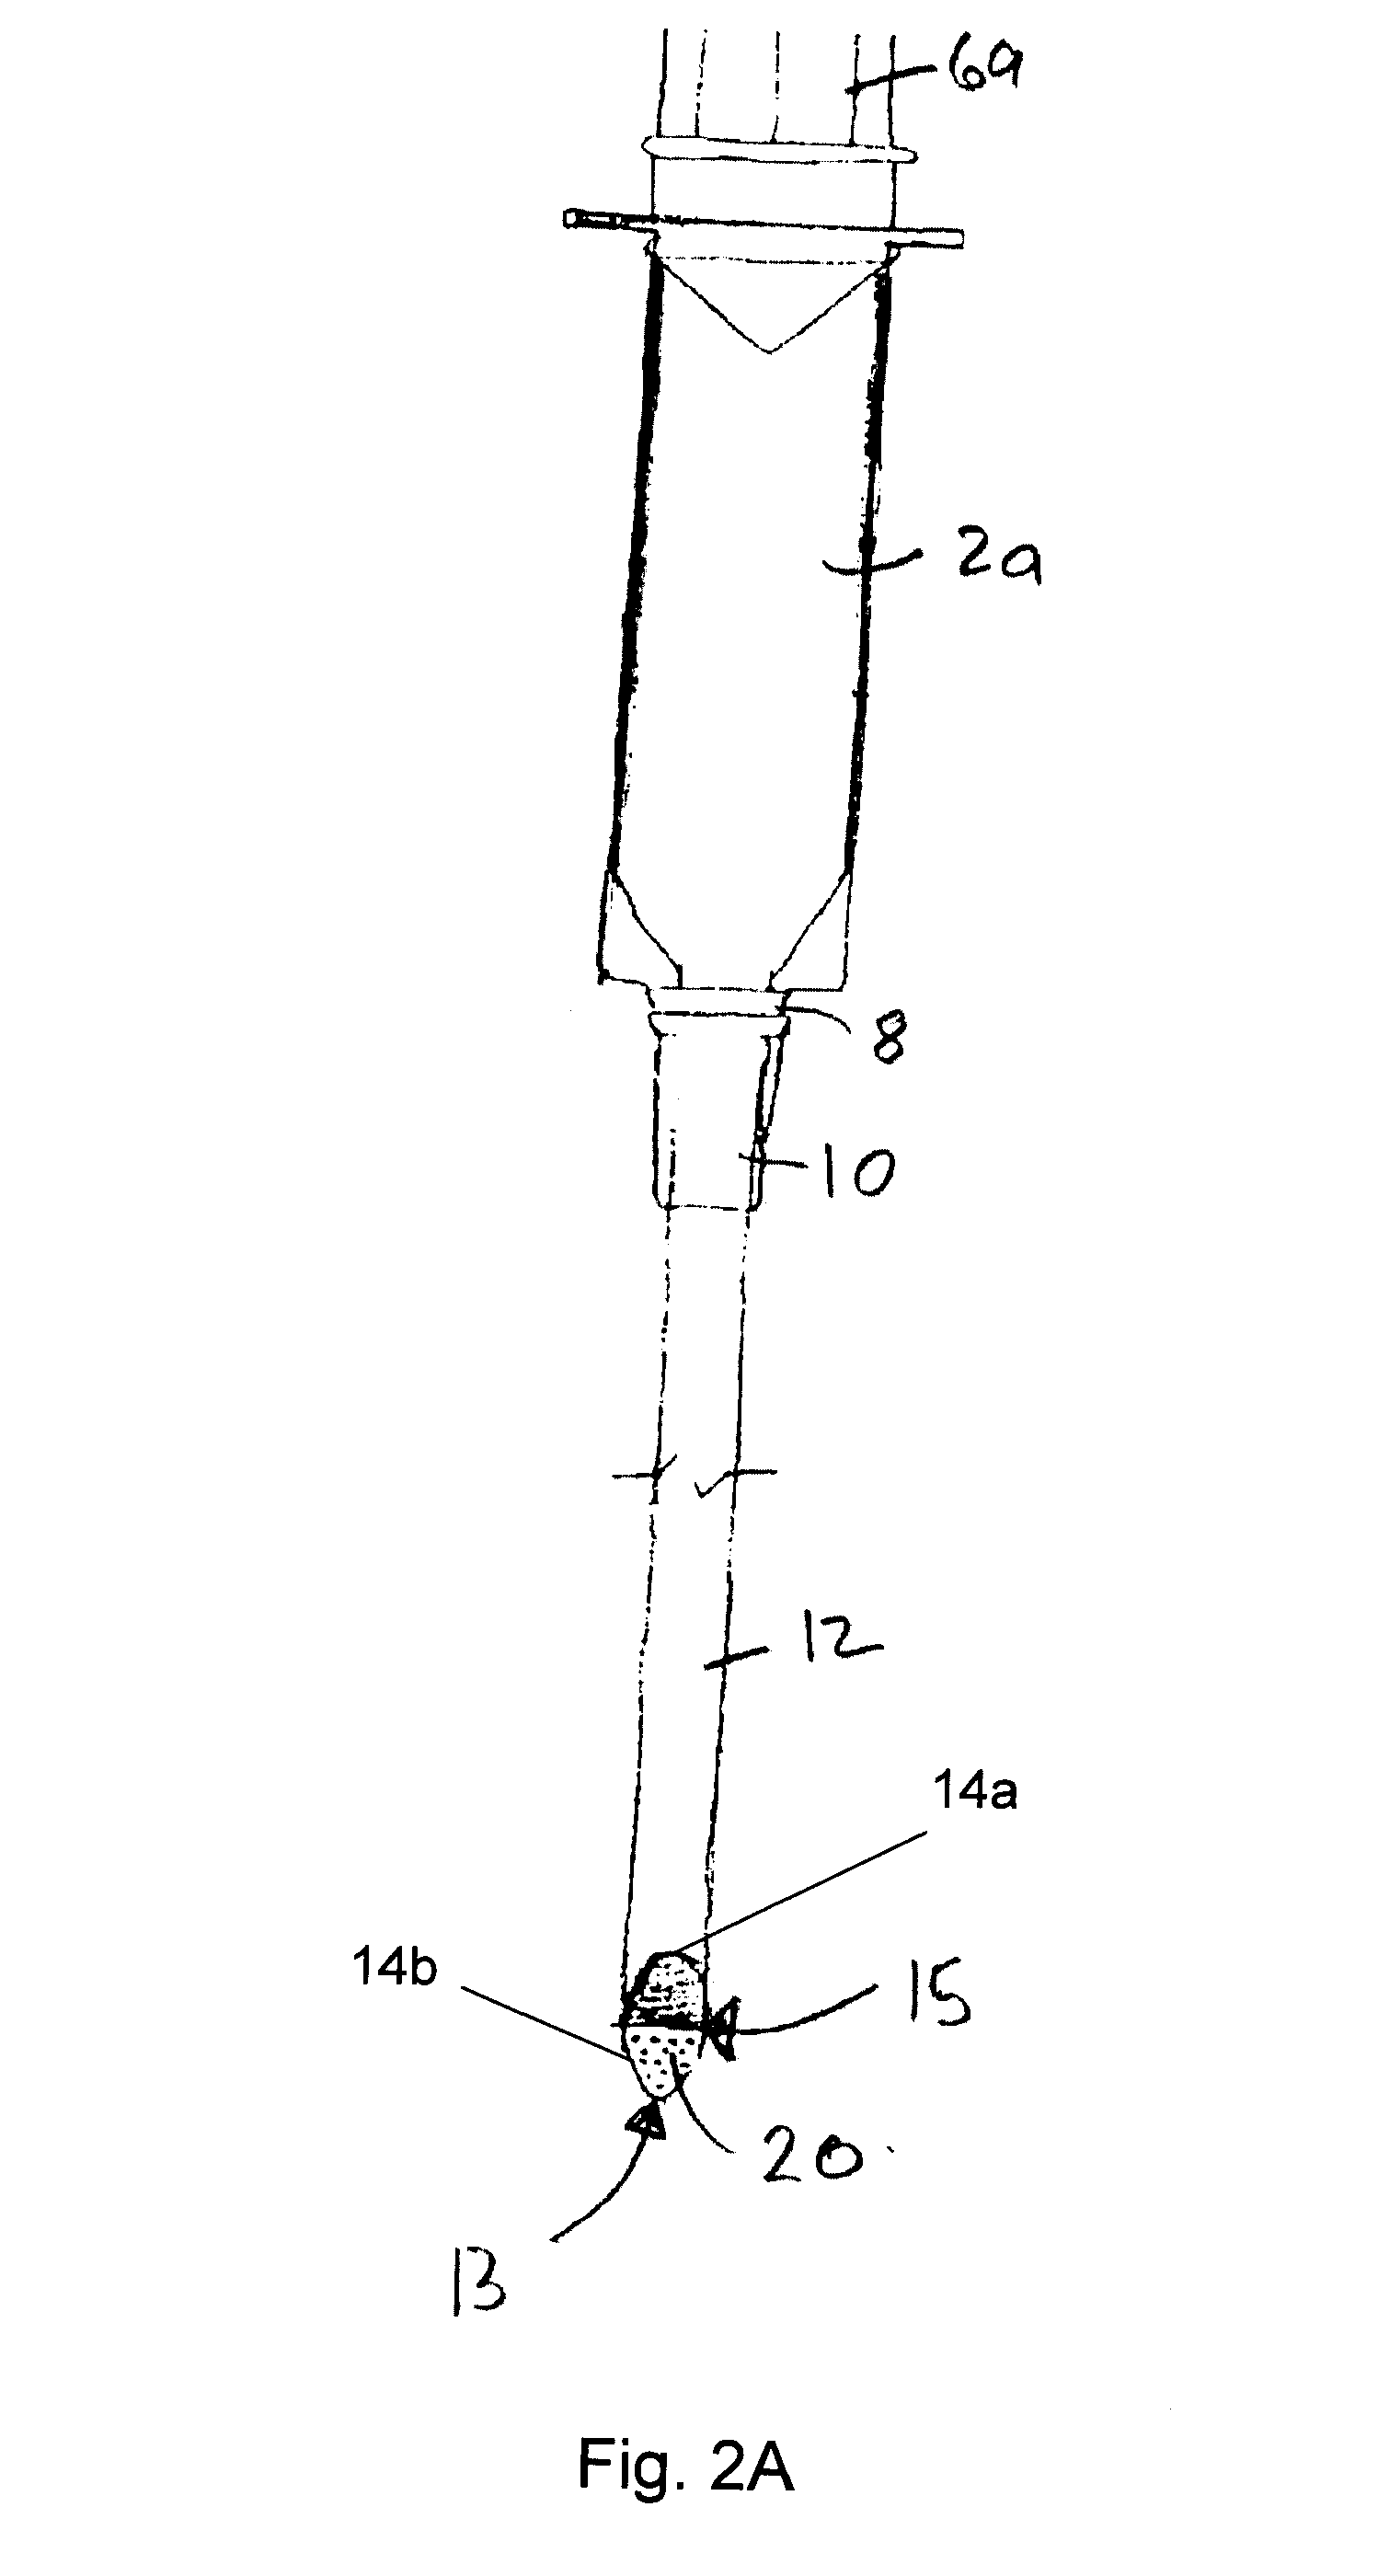 Microparticle delivery syringe and needle for placing particle suspensions and removing vehicle fluid